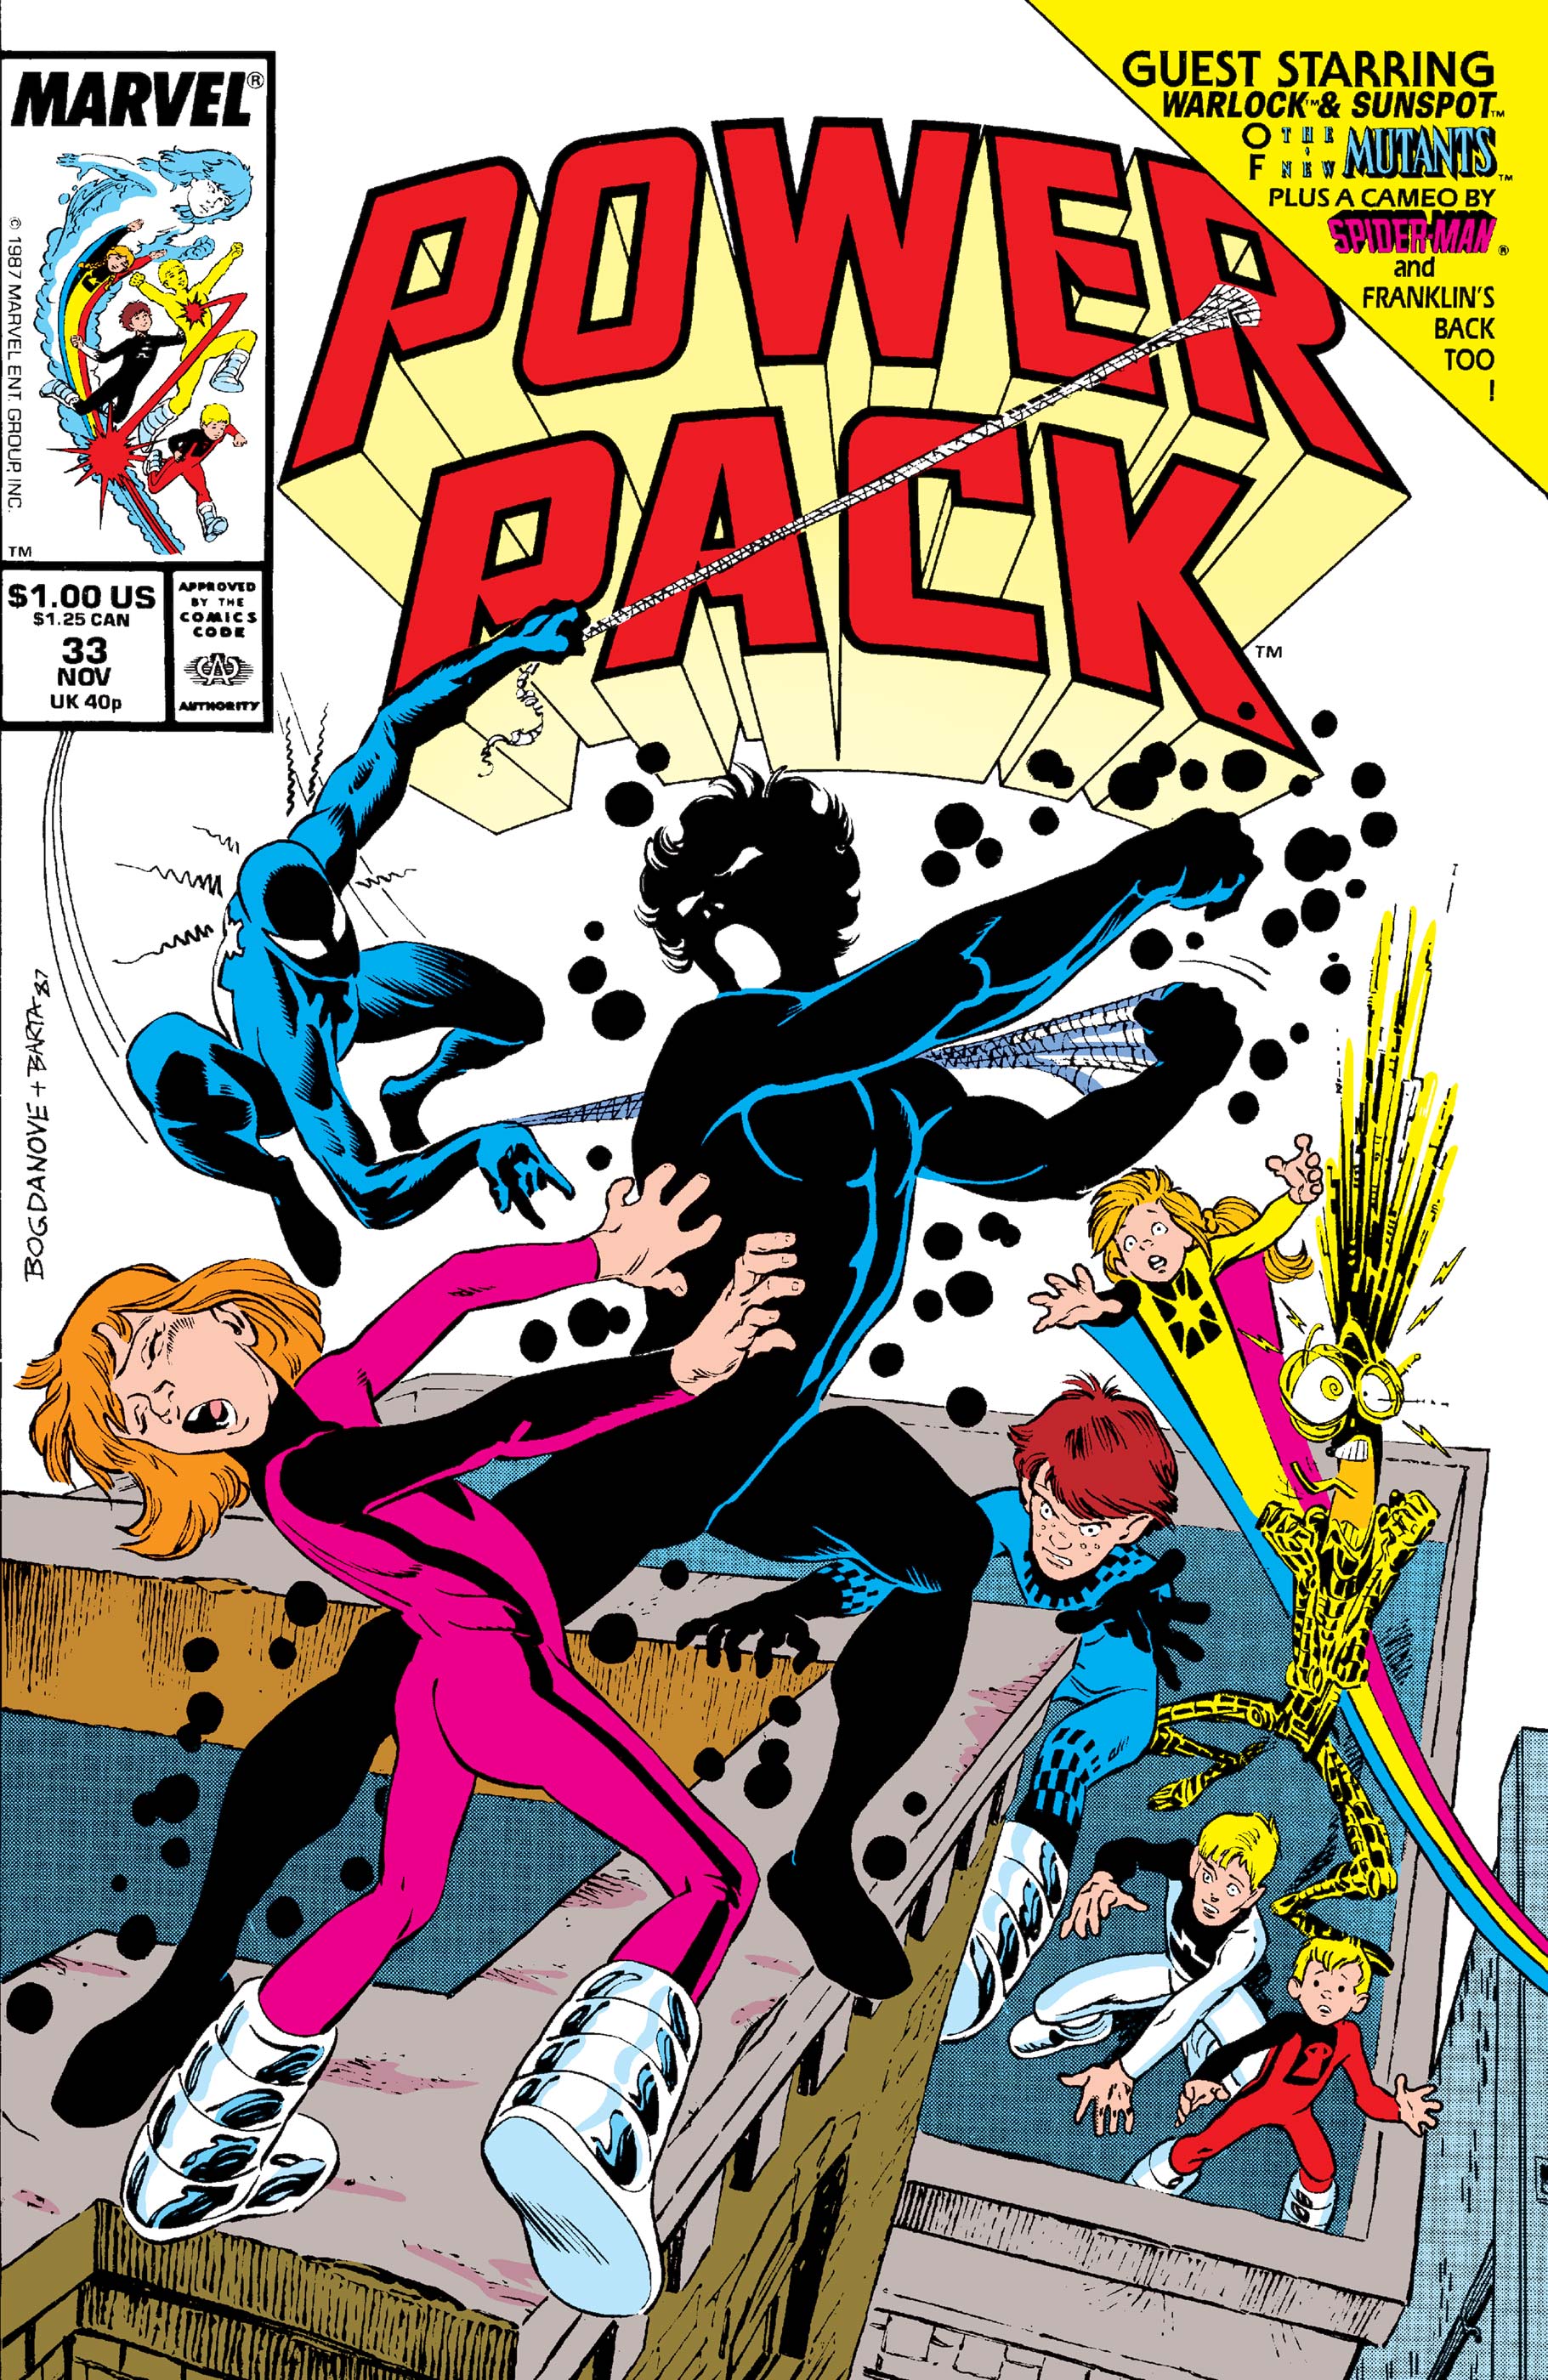 Power Pack (1984) #33, Comic Issues